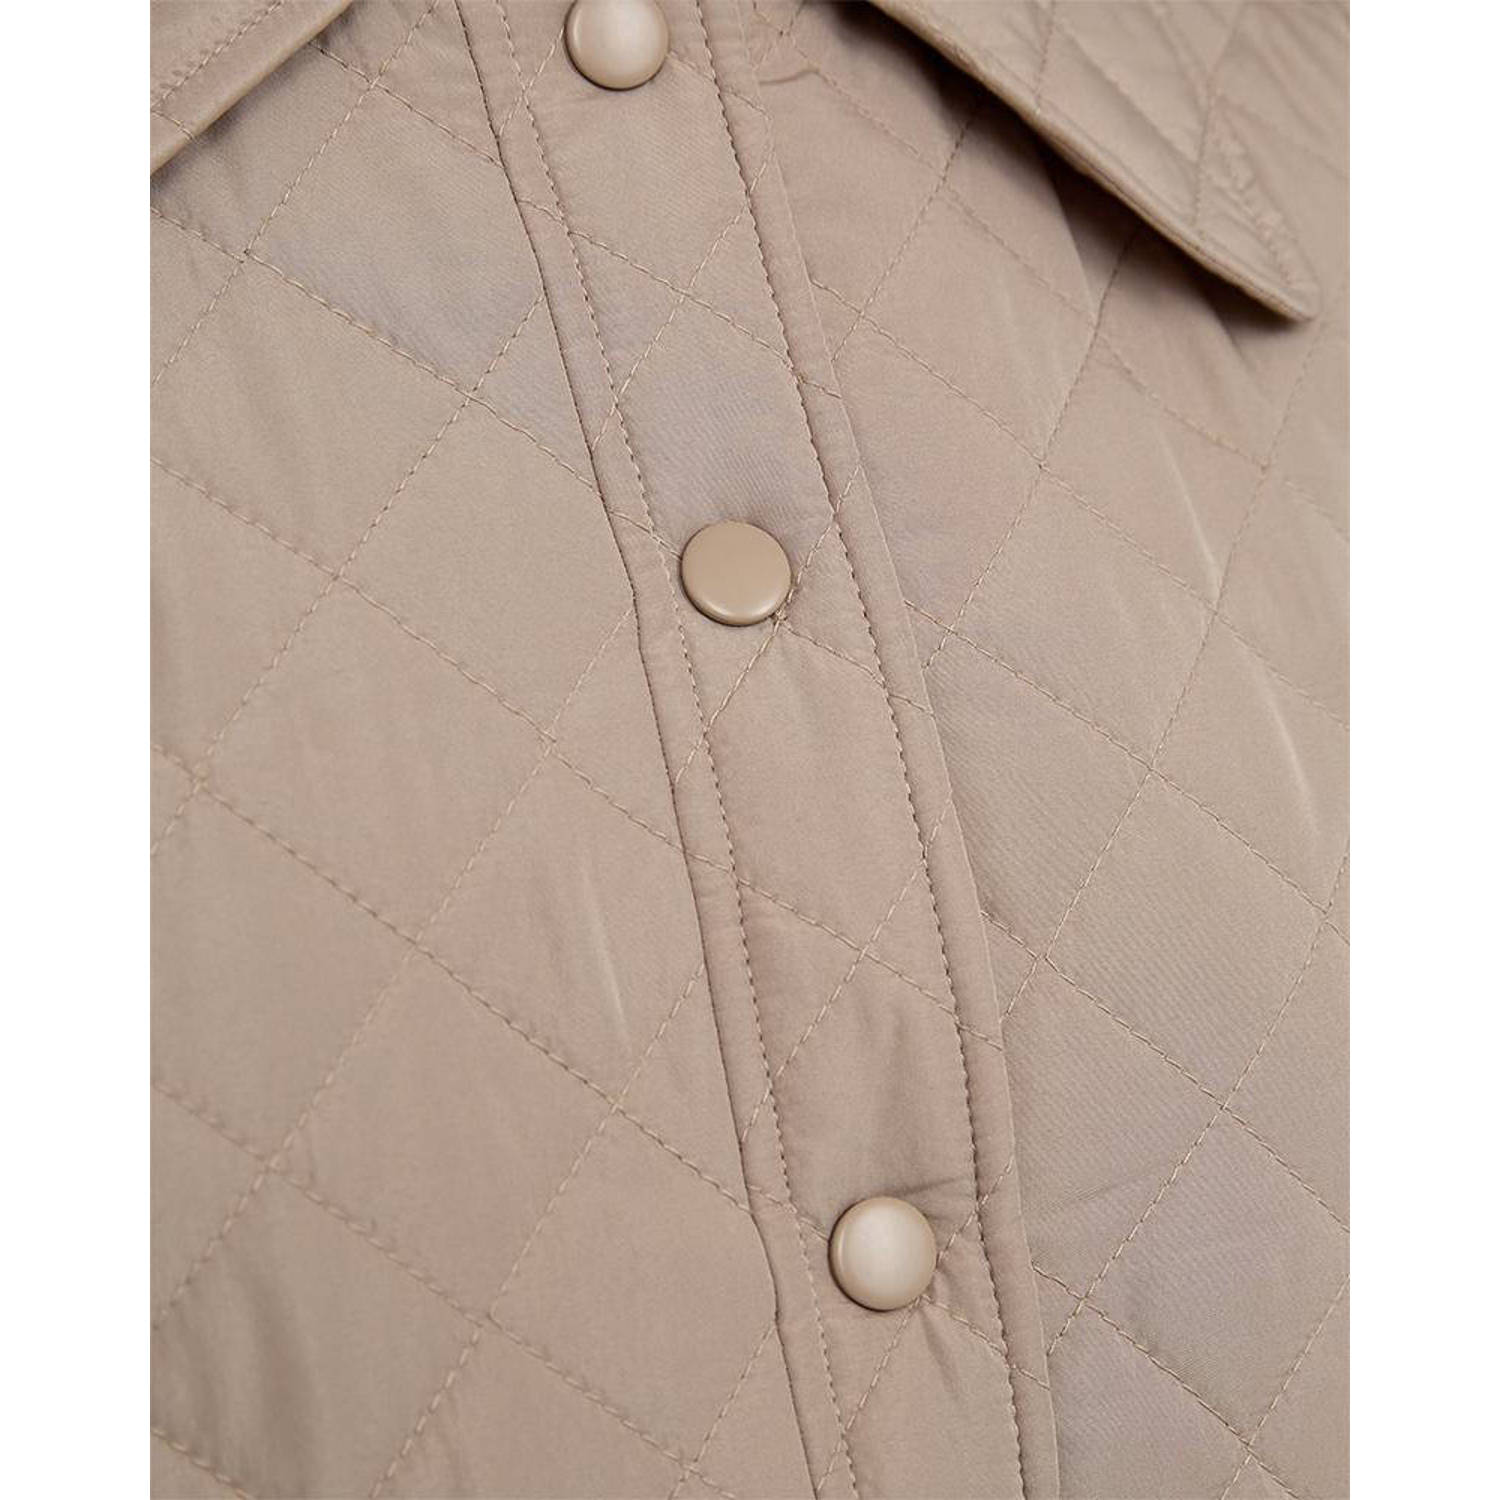 FREEQUENT quilted jasje taupe